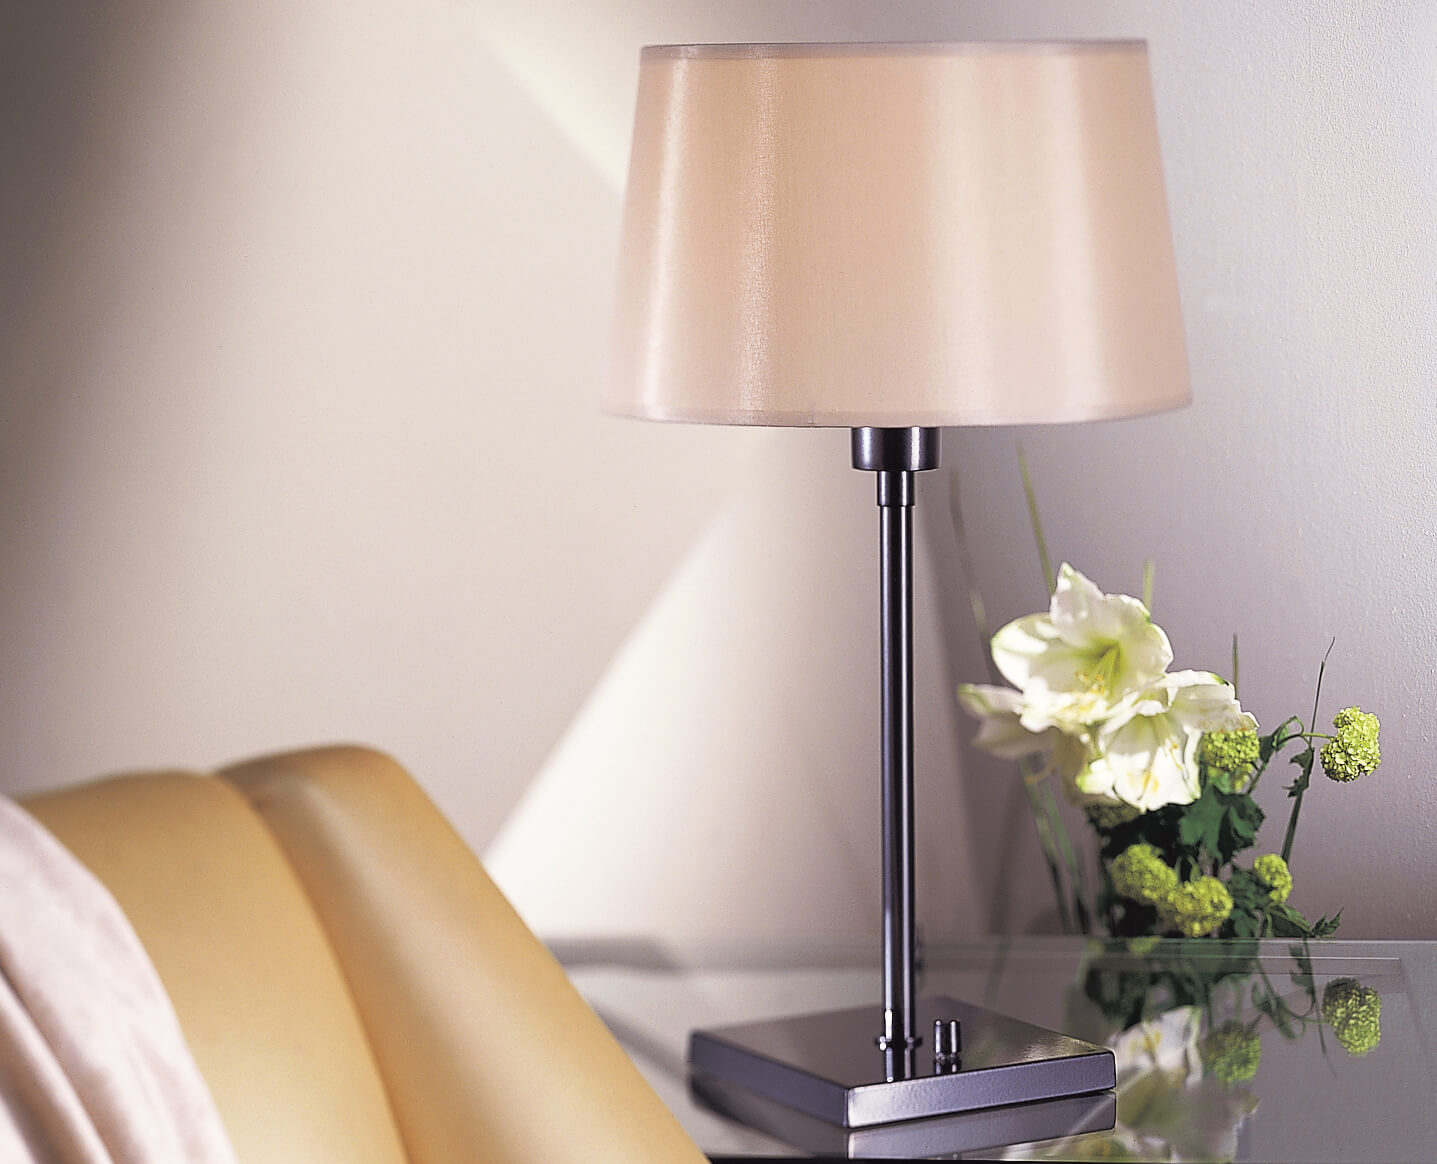 REAL SIMPLE TABLE LAMP by Robert Abbey